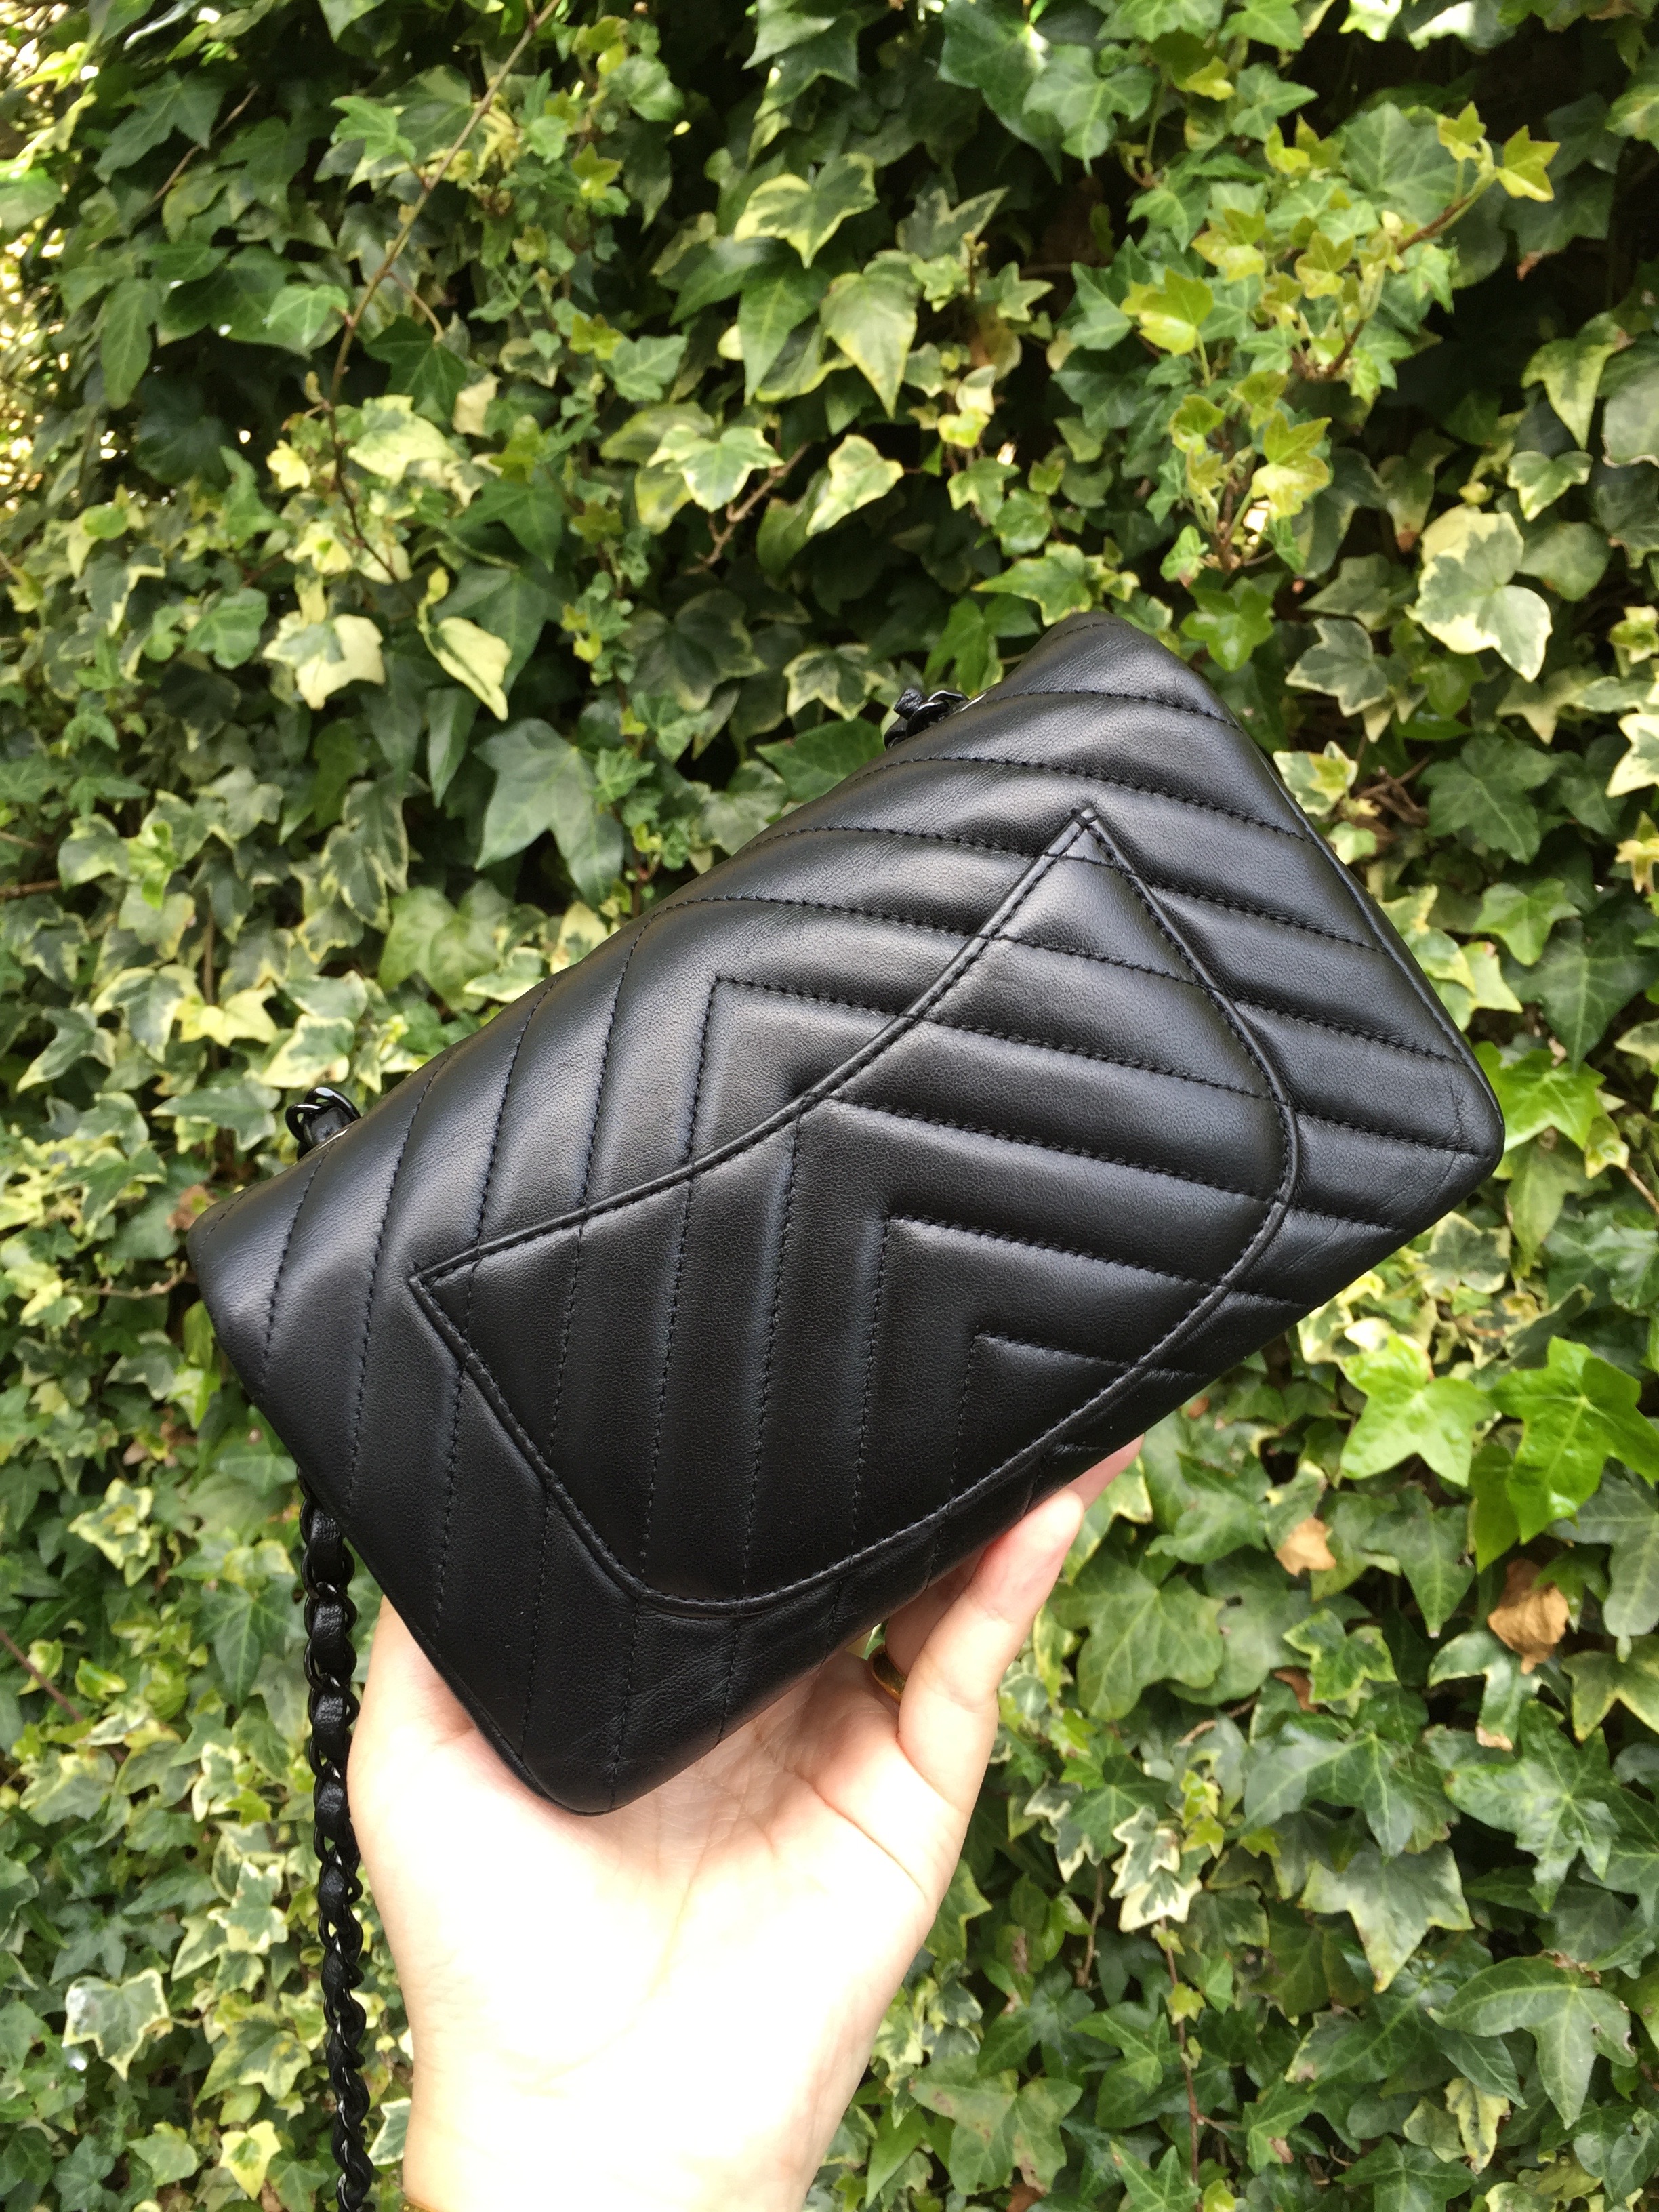 Chanel 'So Black' WoC Wallet On Chain Reissue In Chevron Quilted